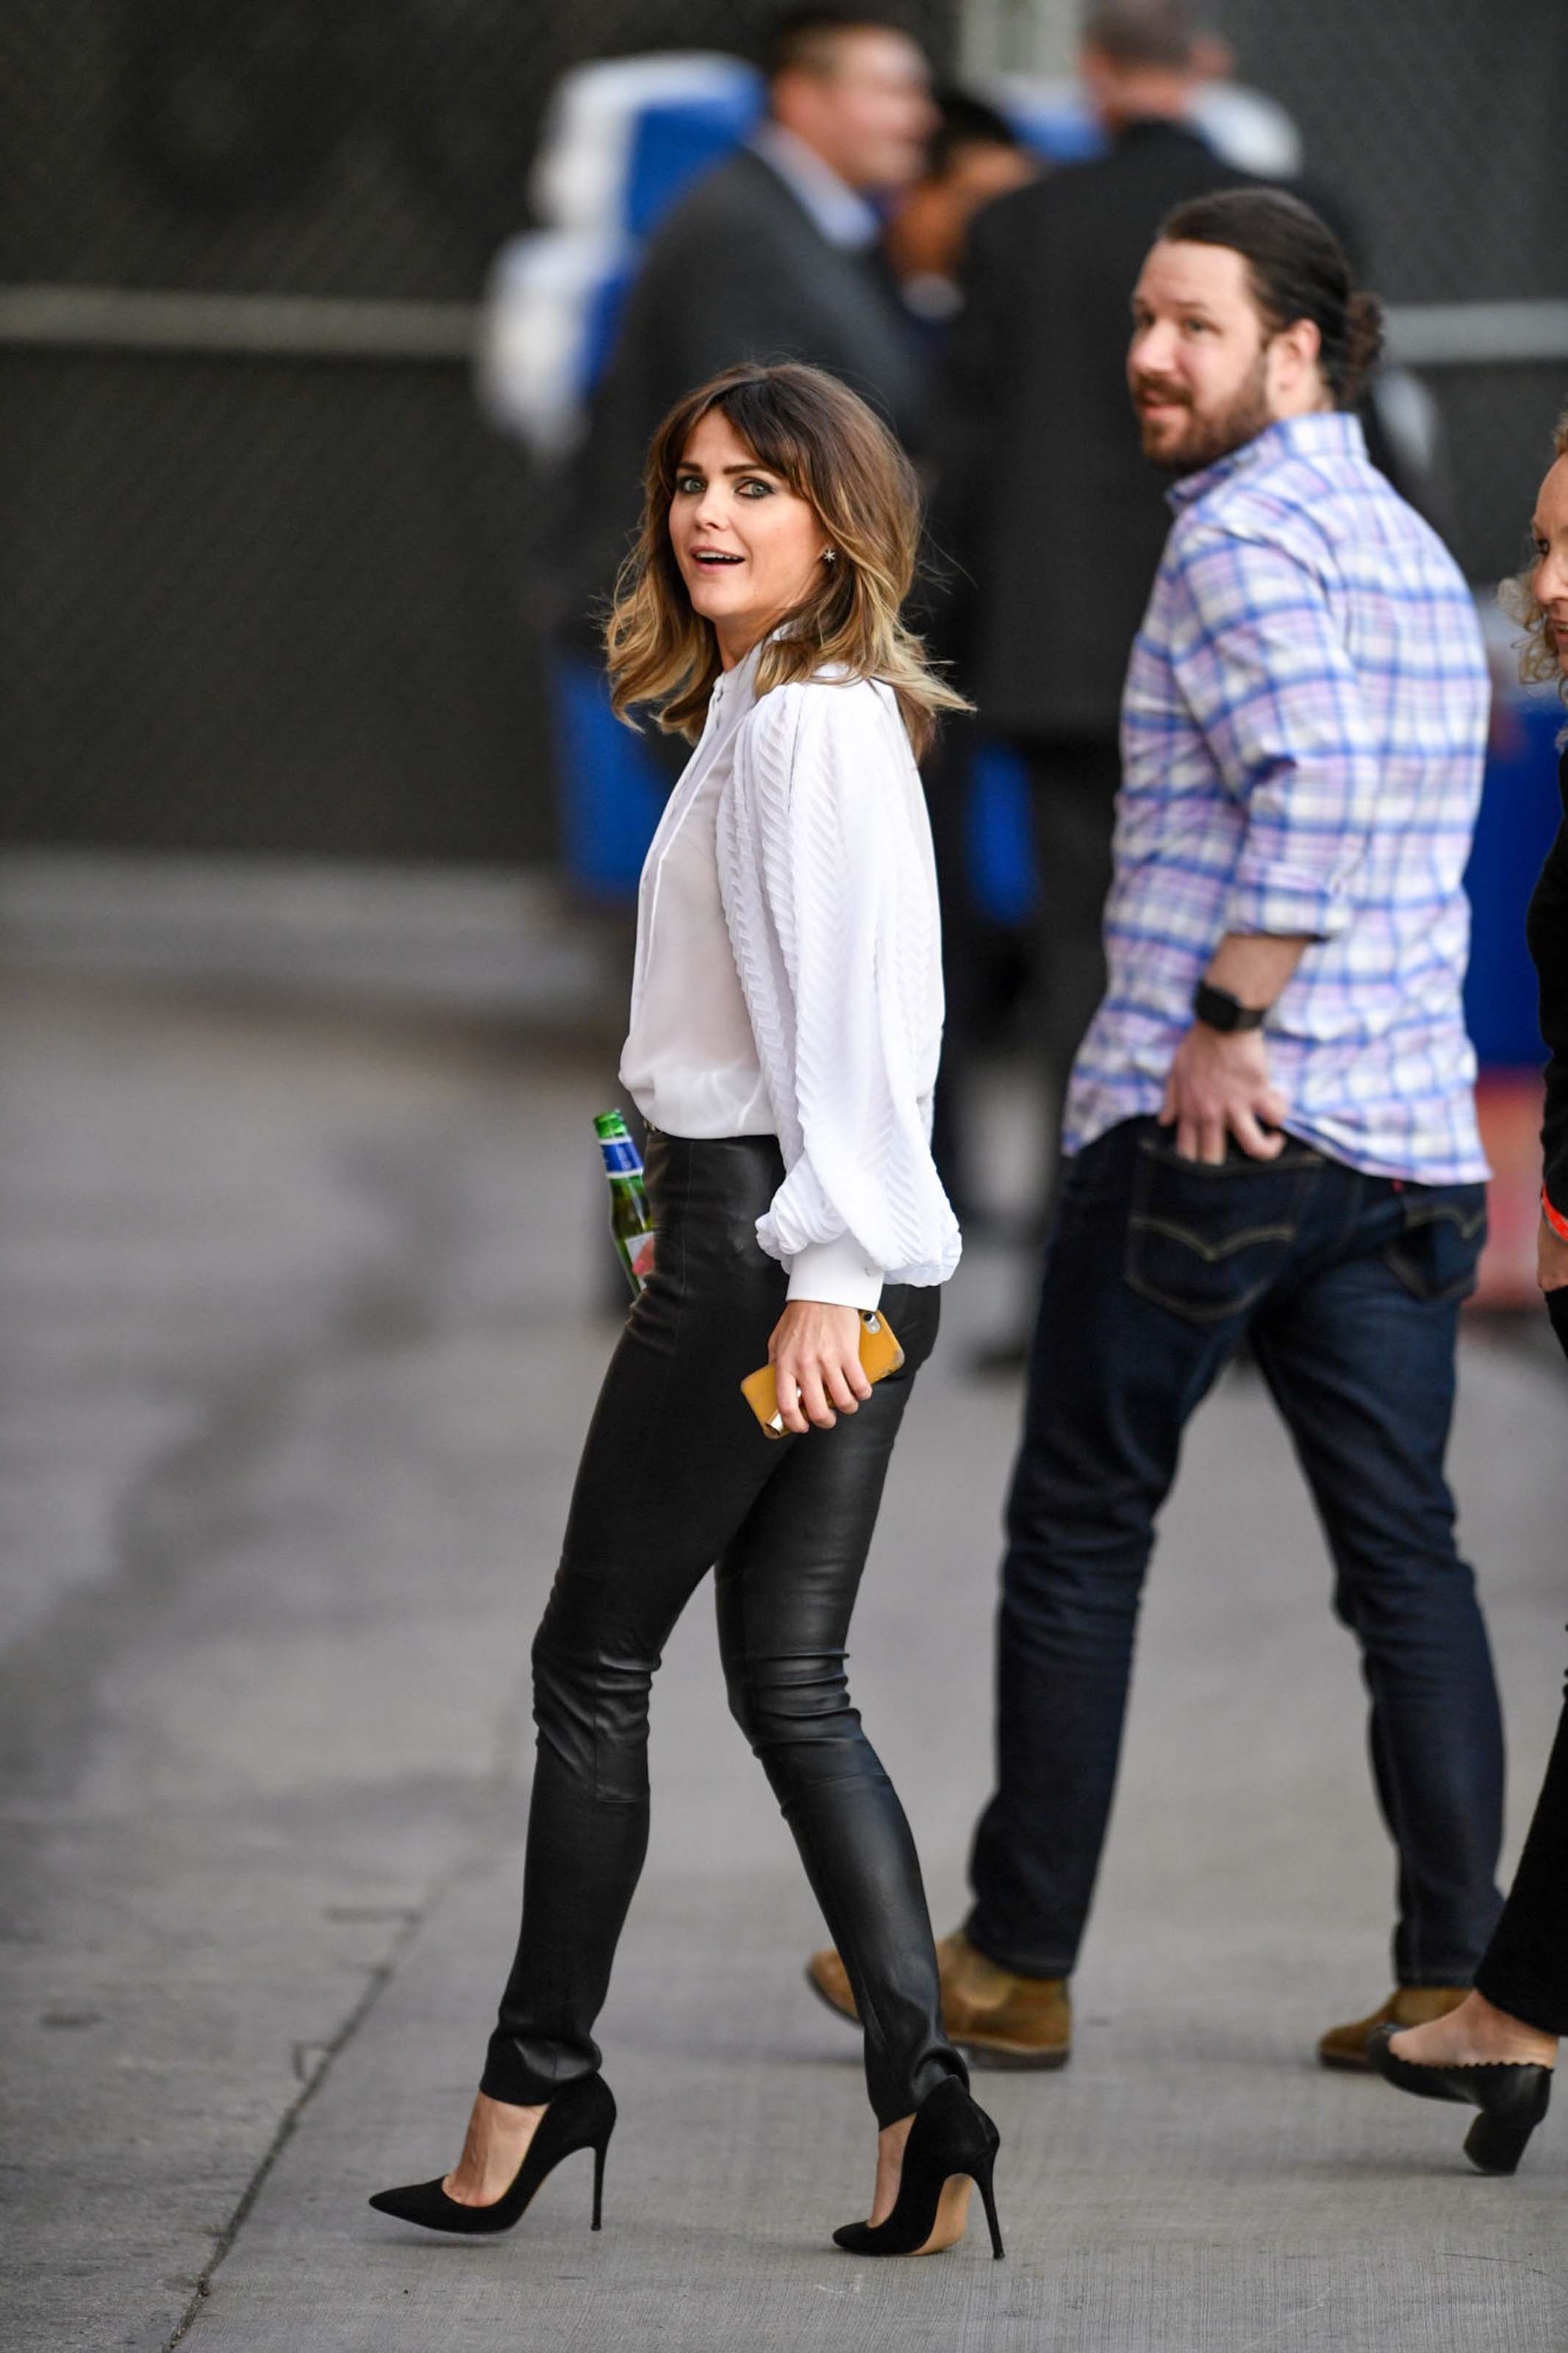 Keri Russell arriving at the Jimmy Kimmel Live